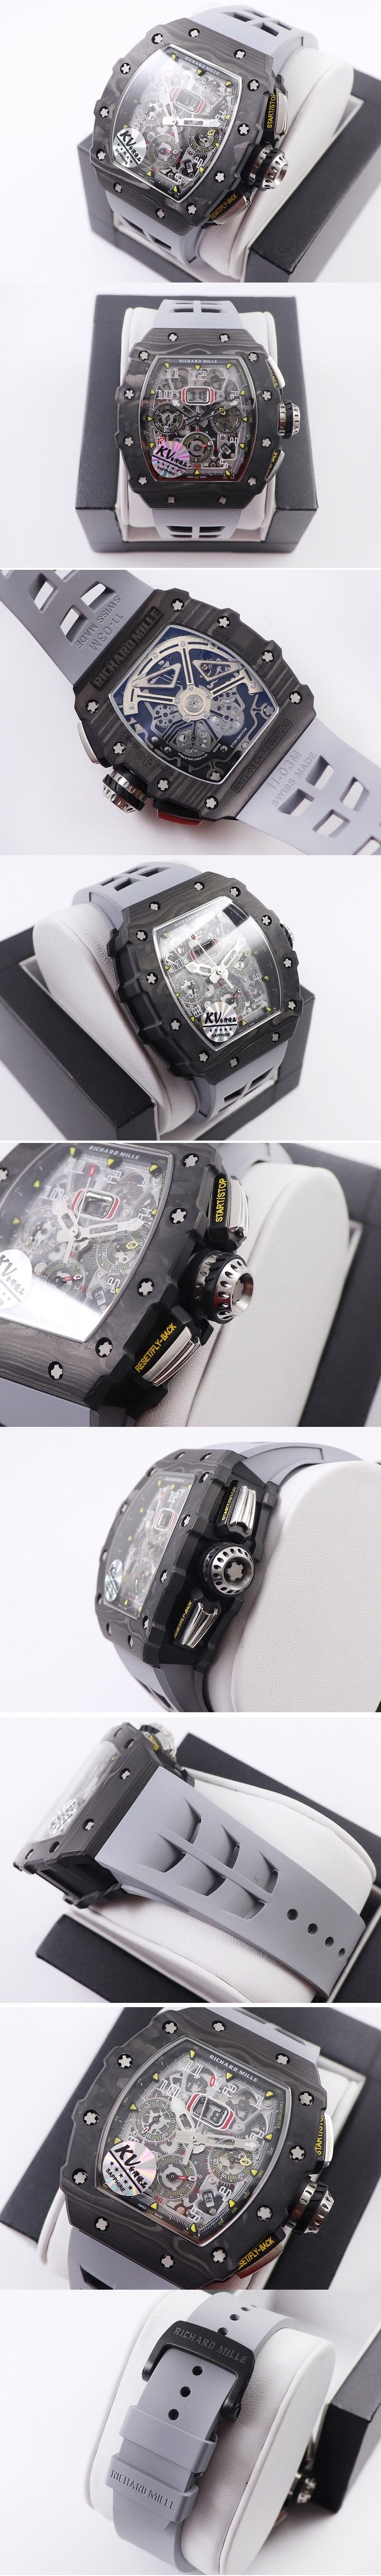 Replica Richard Mille RM011 NTPT Chrono KVF 1:1 Best Edition Crystal Dial on Gray Rubber Strap A7750 V2